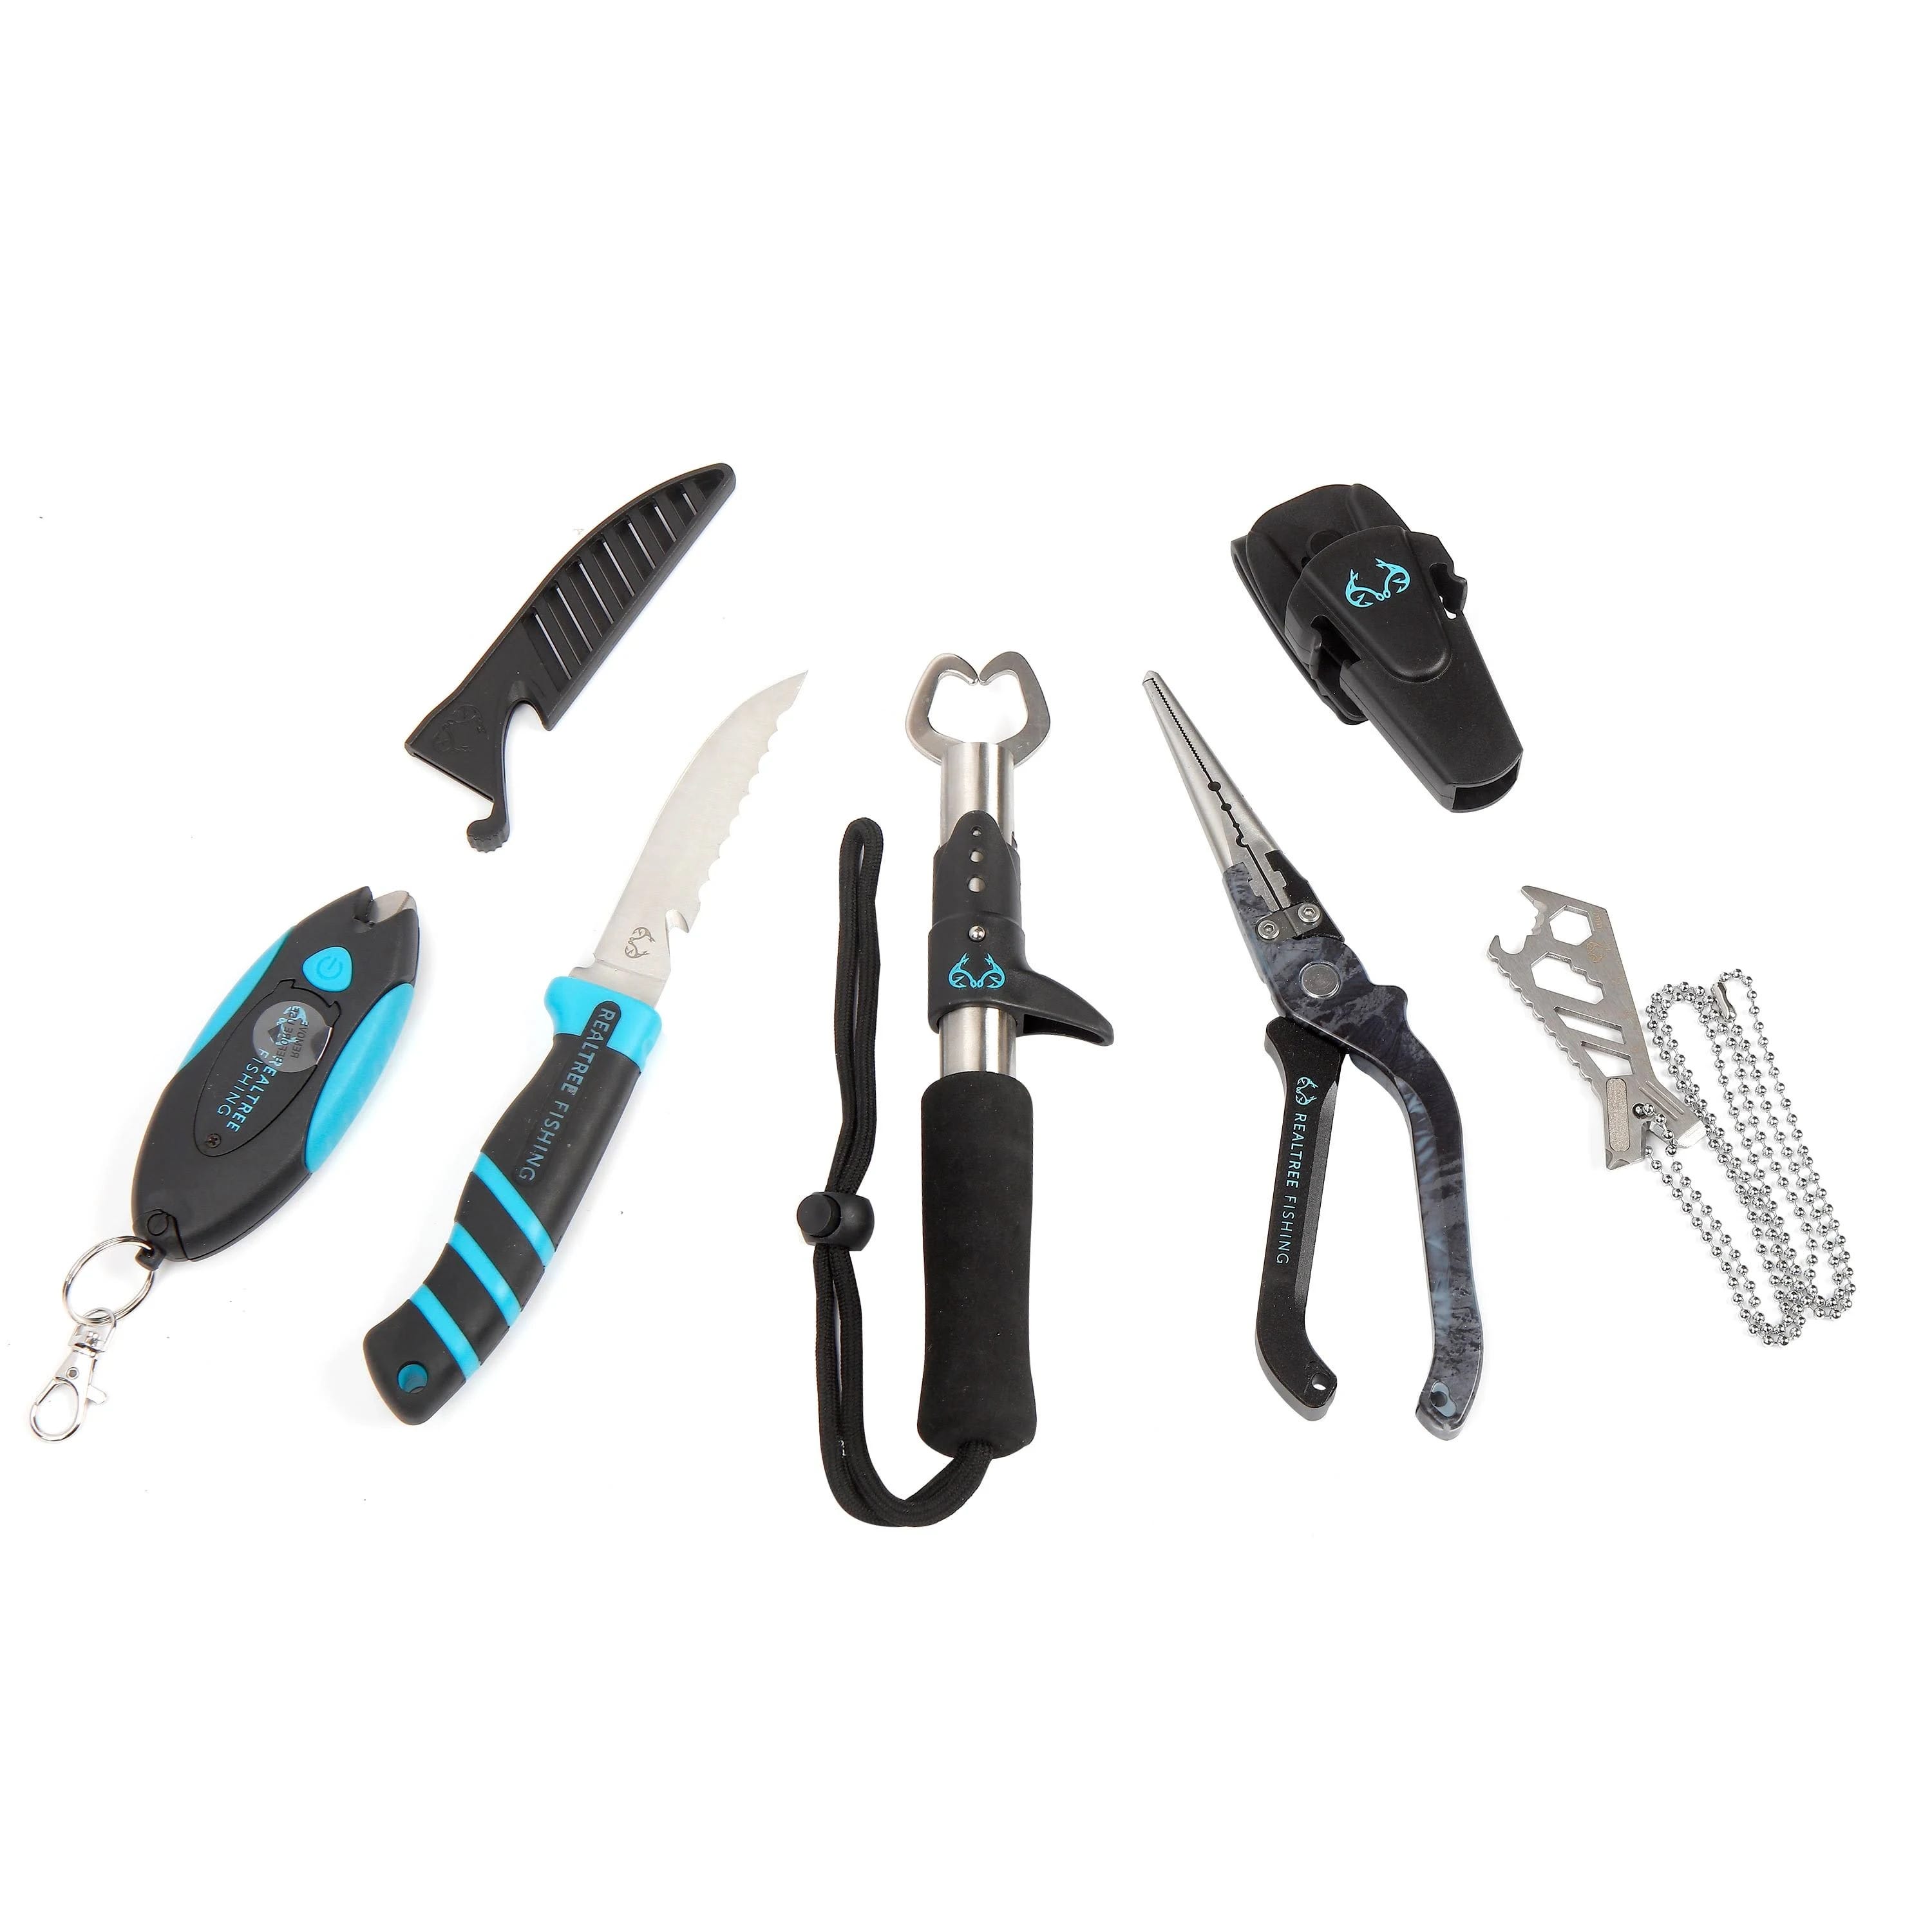 Sidomma Fishing Pliers and Gripper Set, Fishmen Must Have